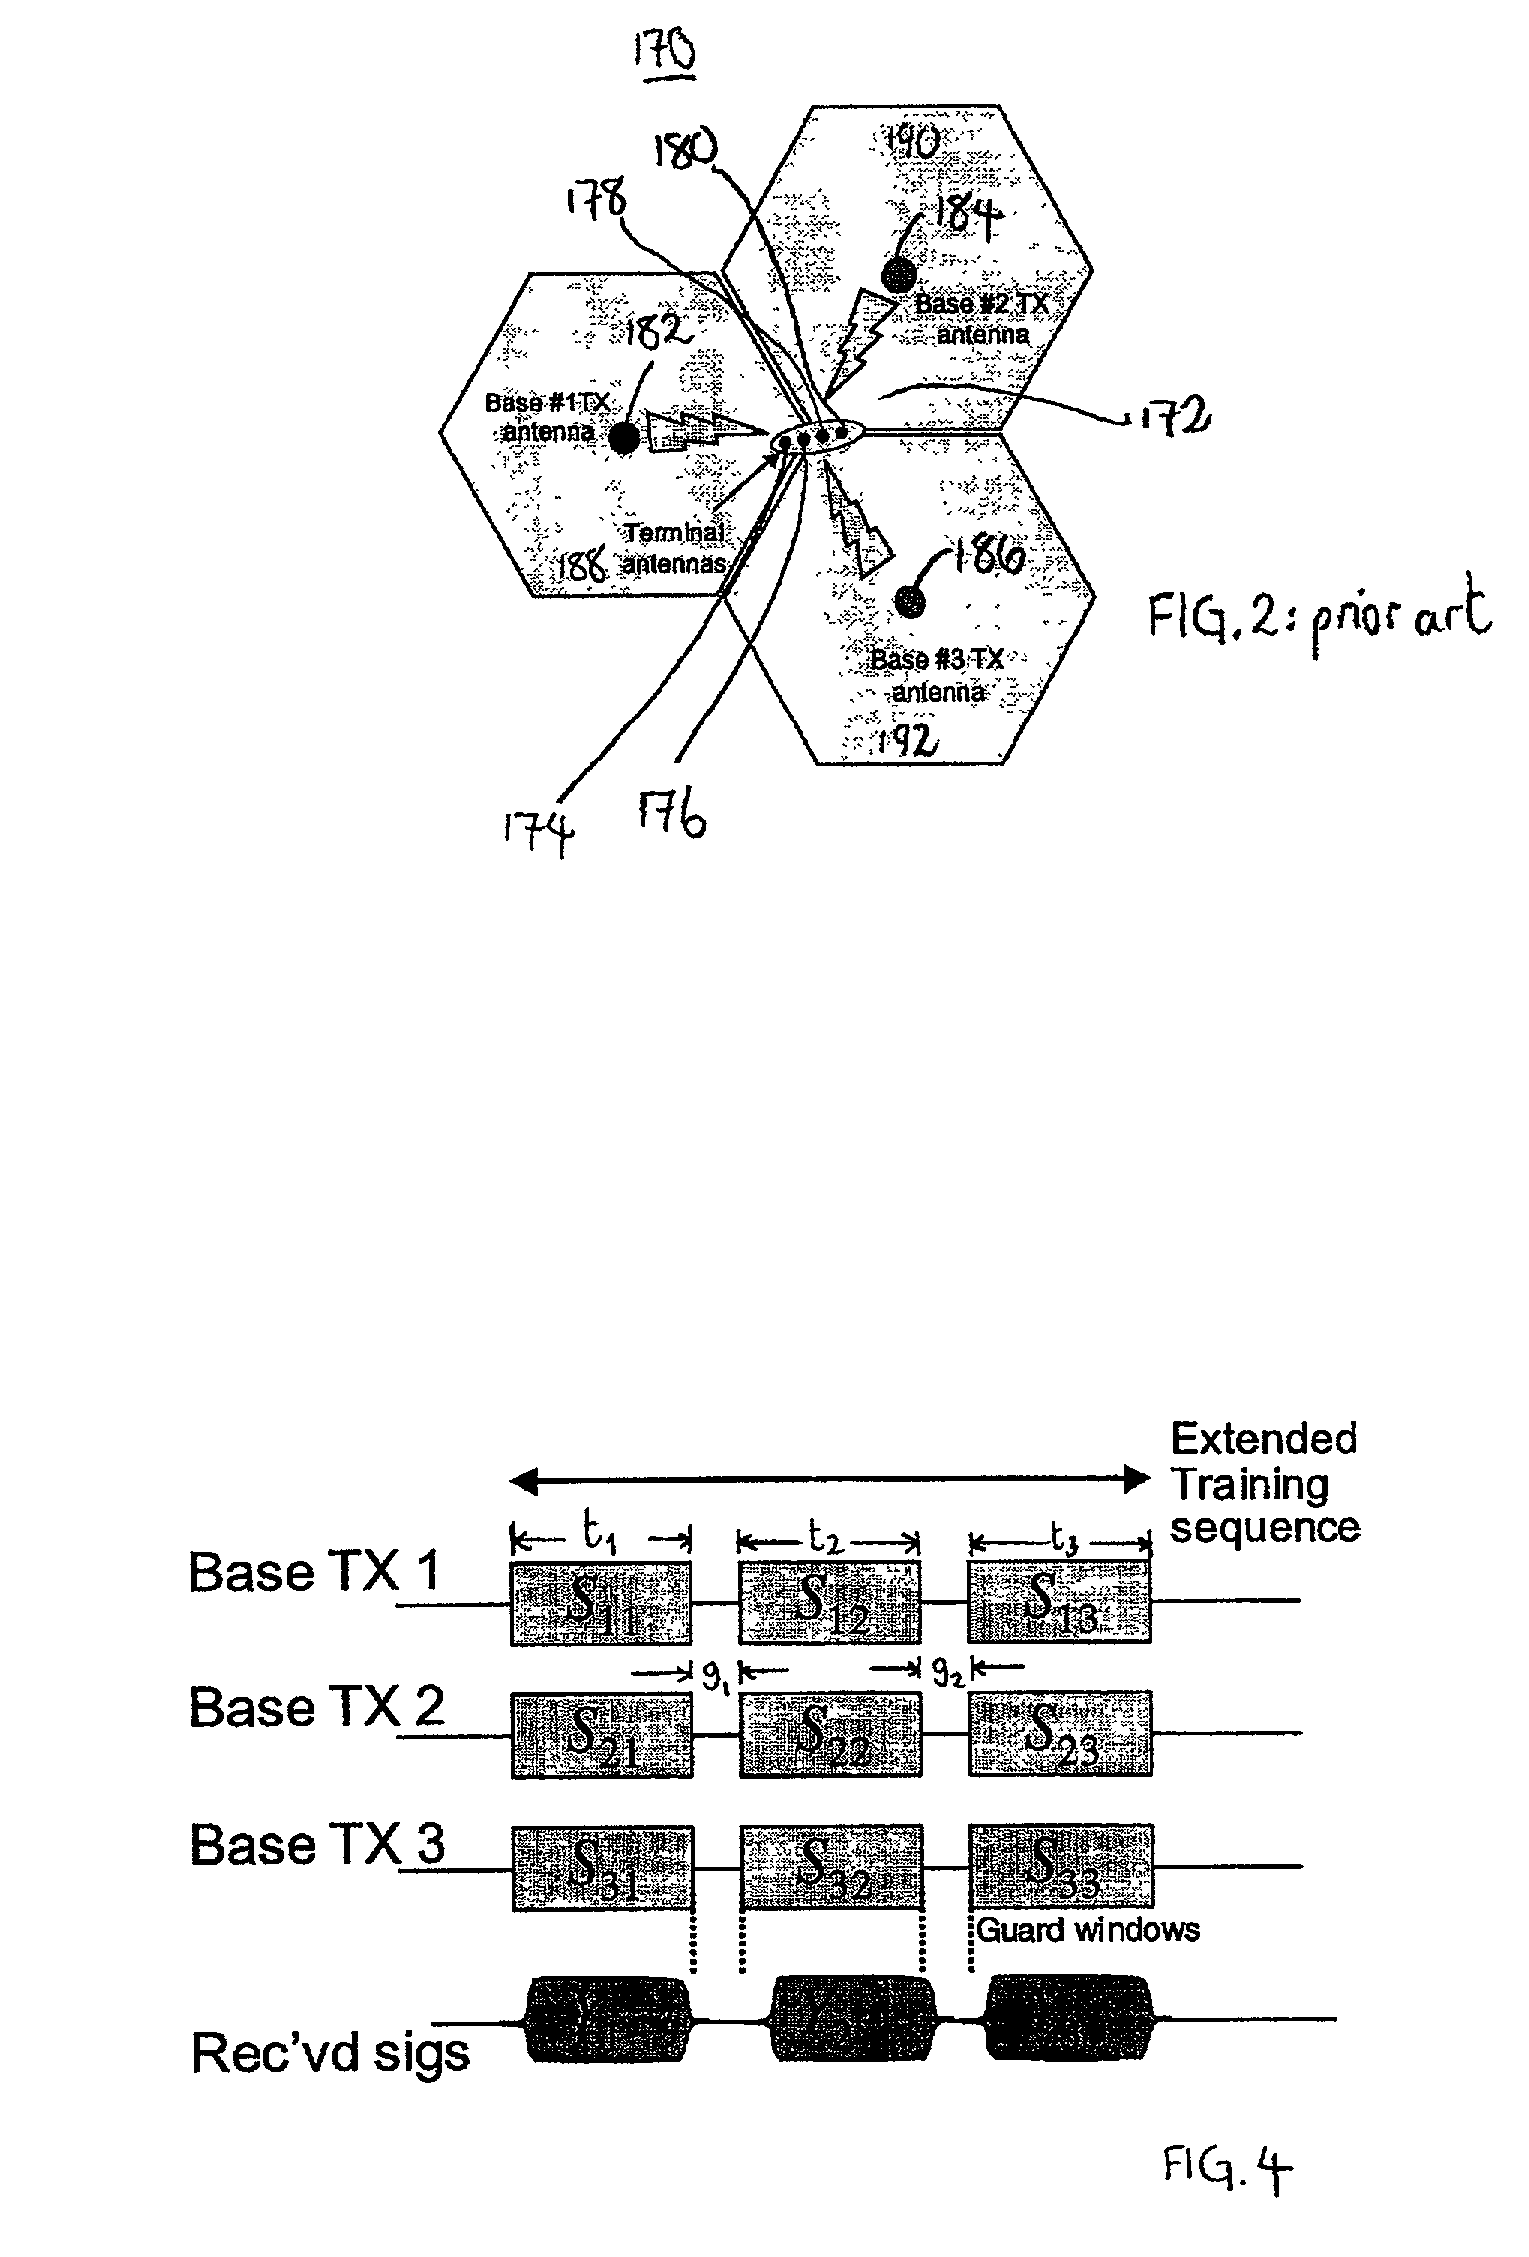 Multi-cast communication system and method of estimating channel impulse responses therein